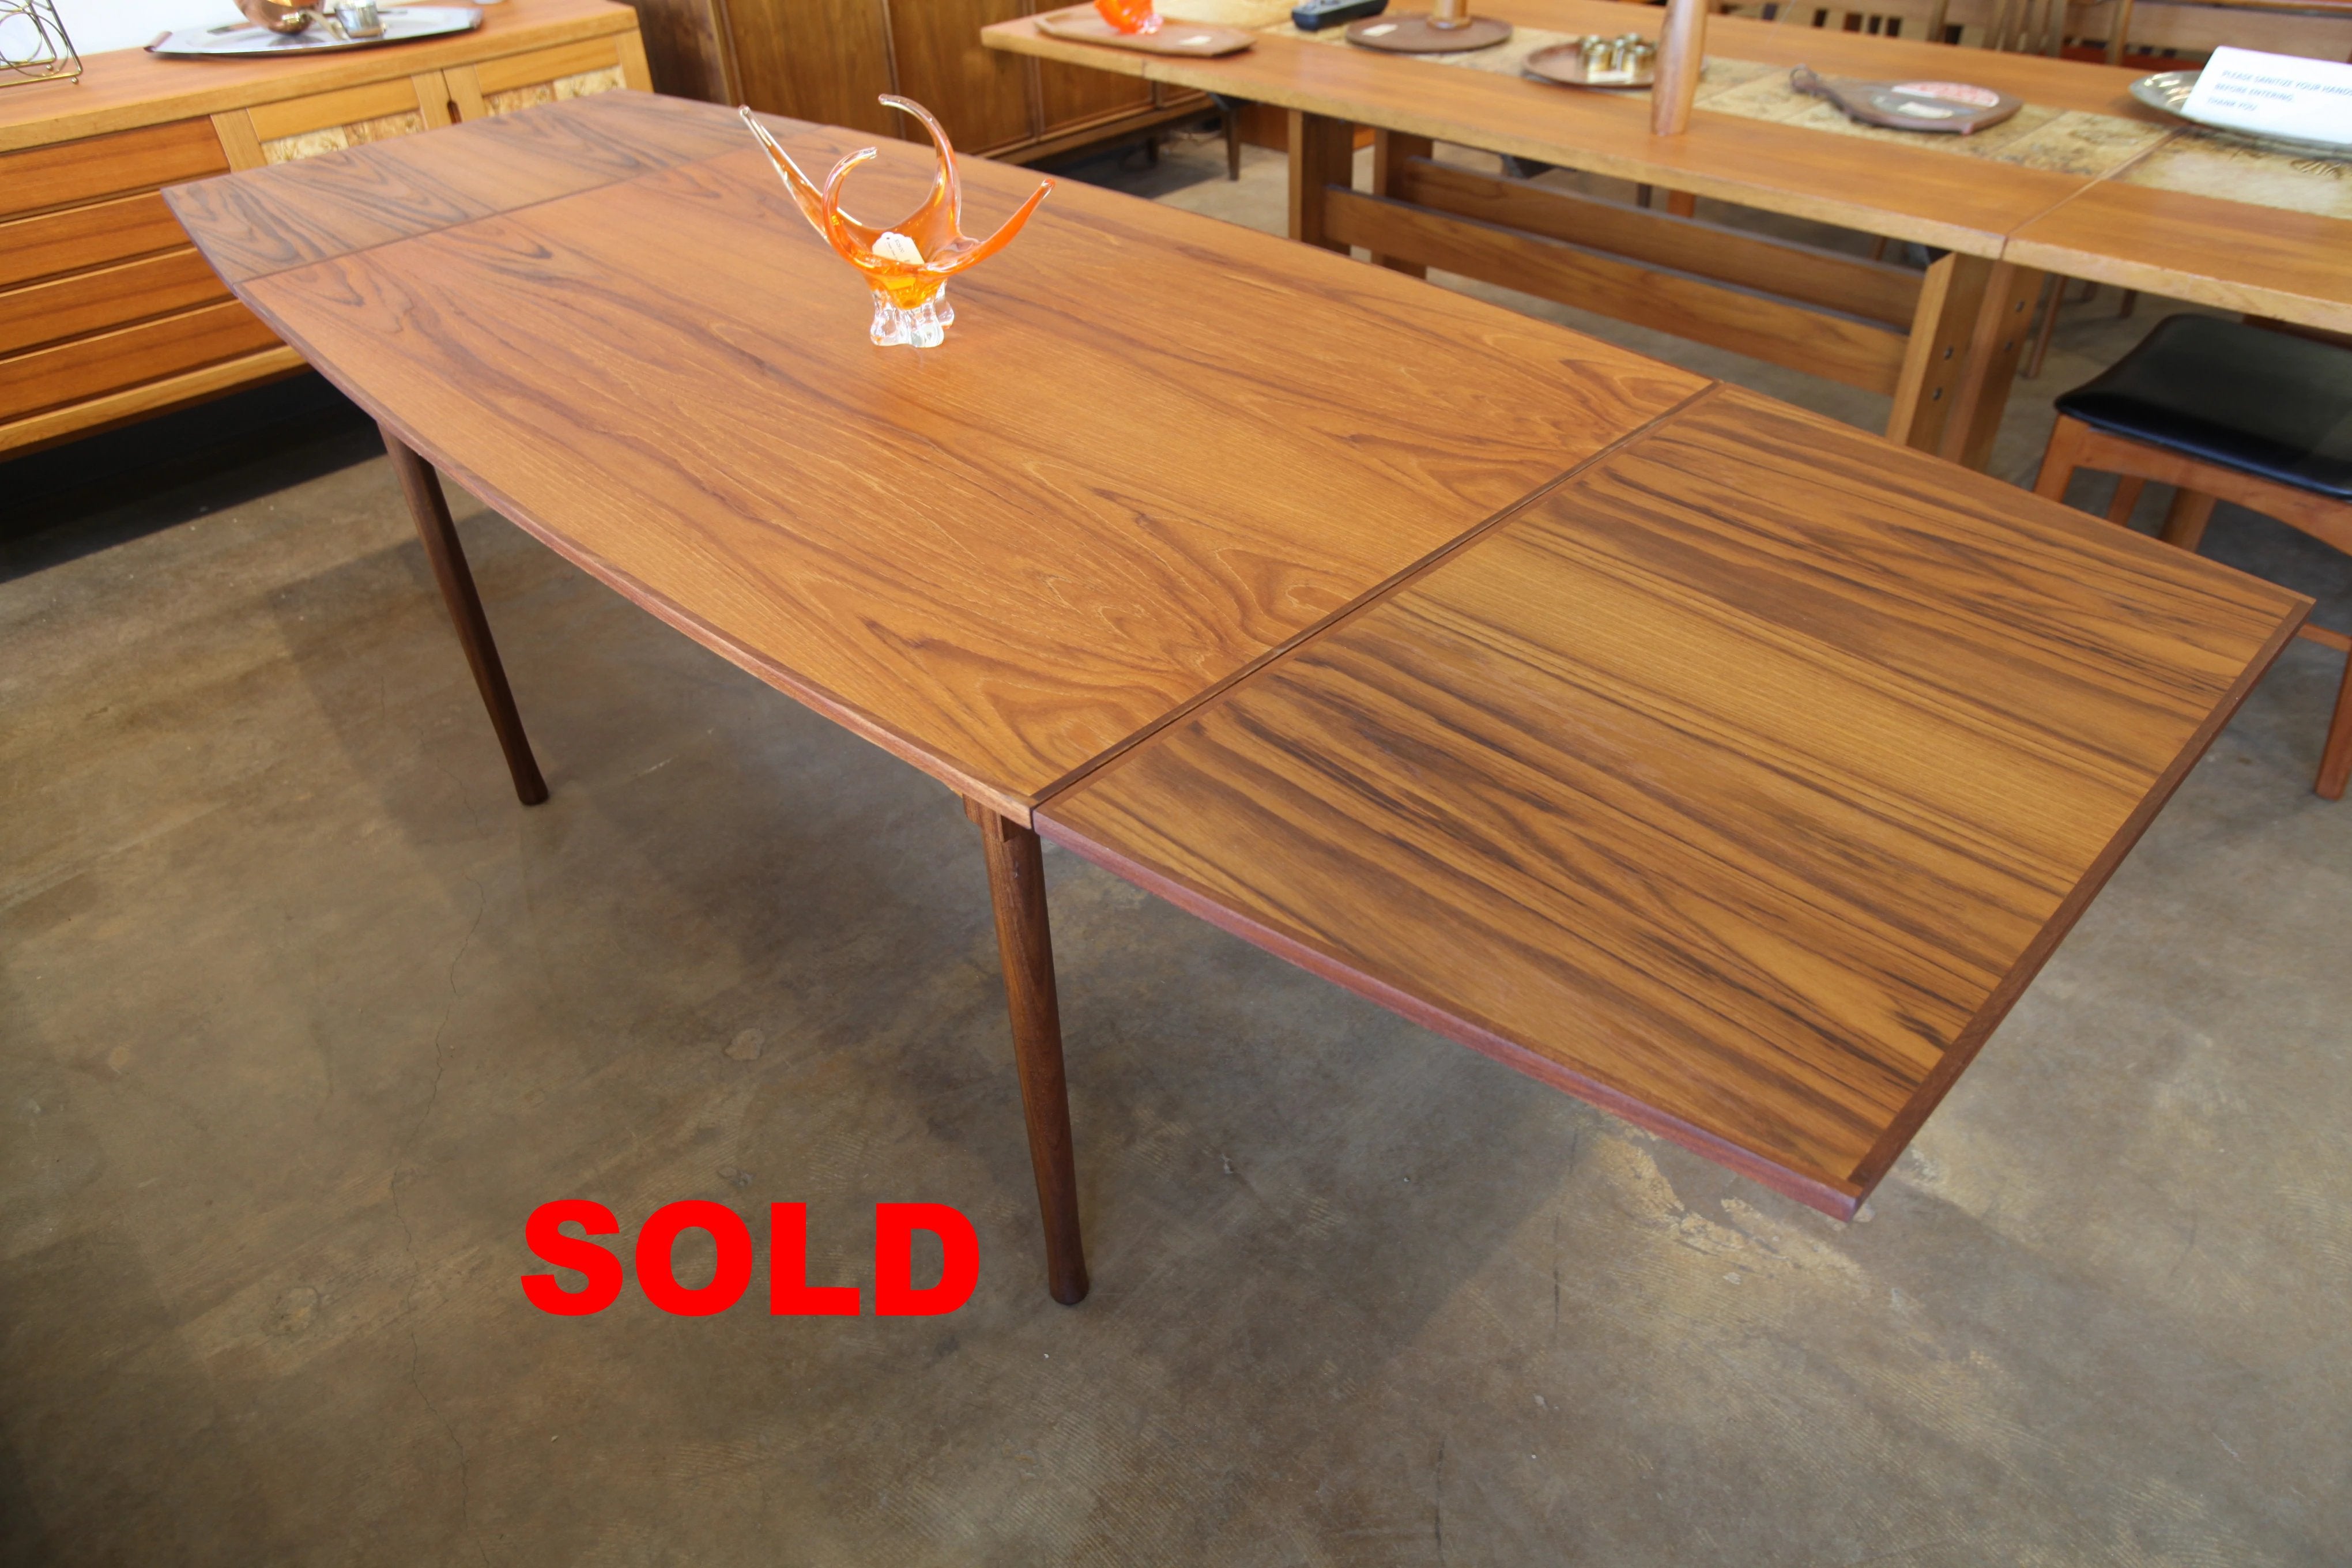 Beautiful Vintage Teak Extension Dining Table by RS Associates (surfboard style)